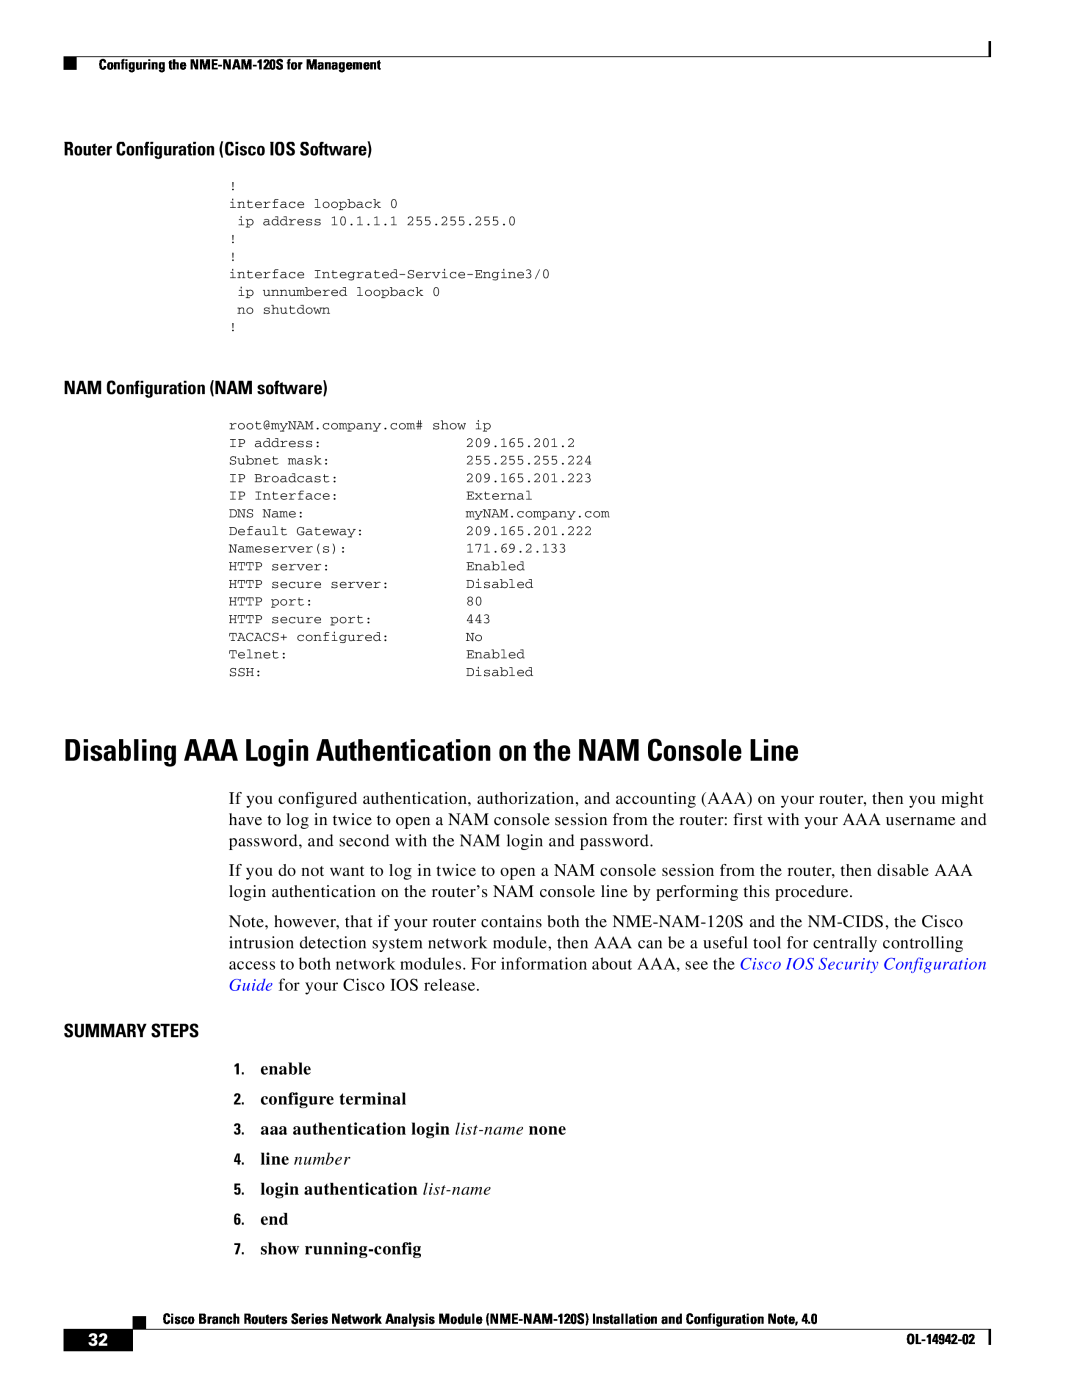 Cisco Systems SMNMADPTR manual Disabling AAA Login Authentication on the NAM Console Line, NAM Configuration NAM software 